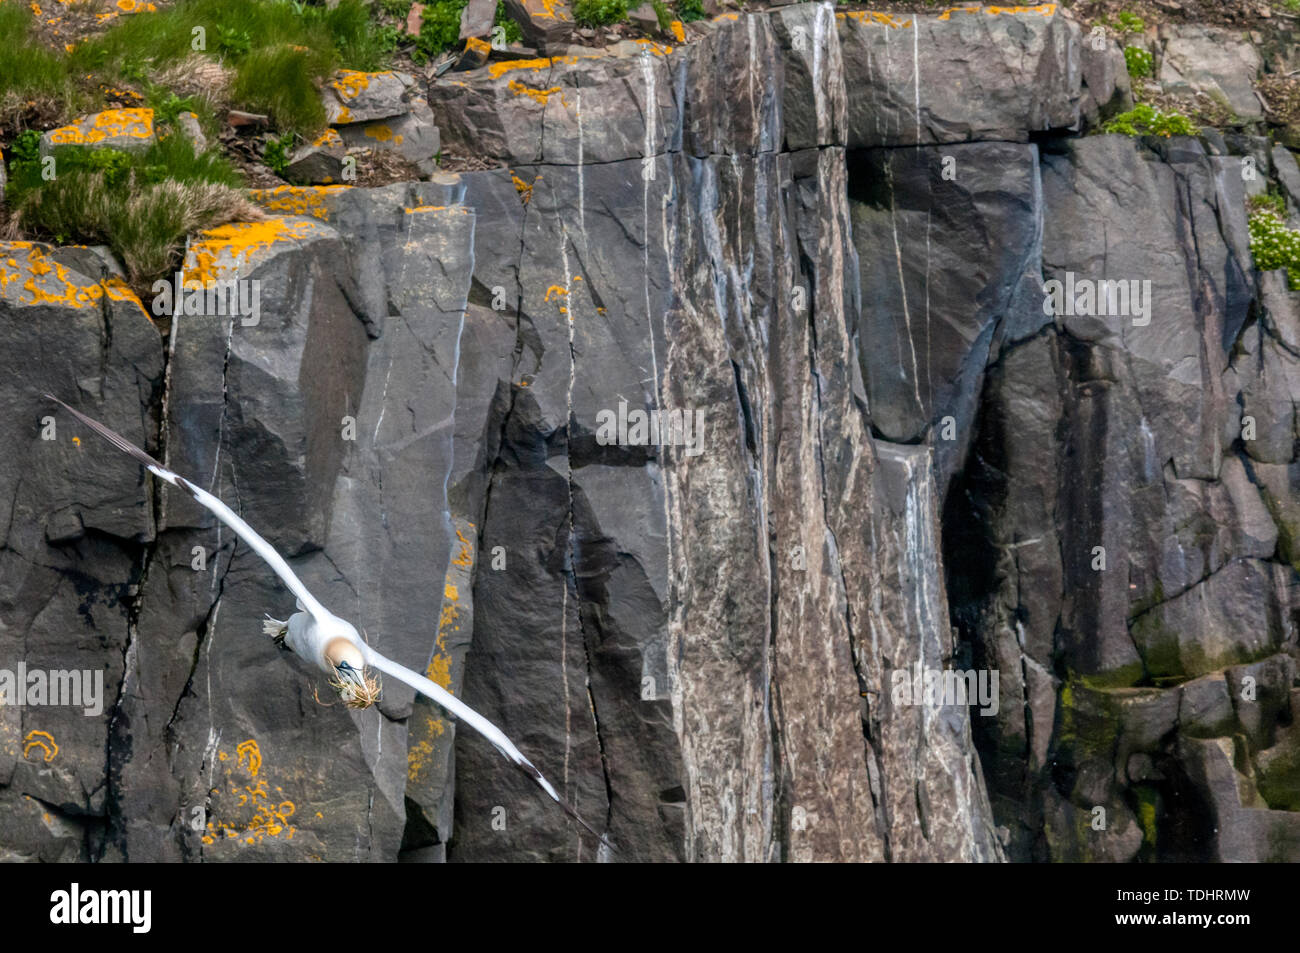 A northern gannet, Morus bassanus, flies in with nesting material in its beak at Cape St. Mary's Ecological Reserve breeding colony on Newfoundland. Stock Photo